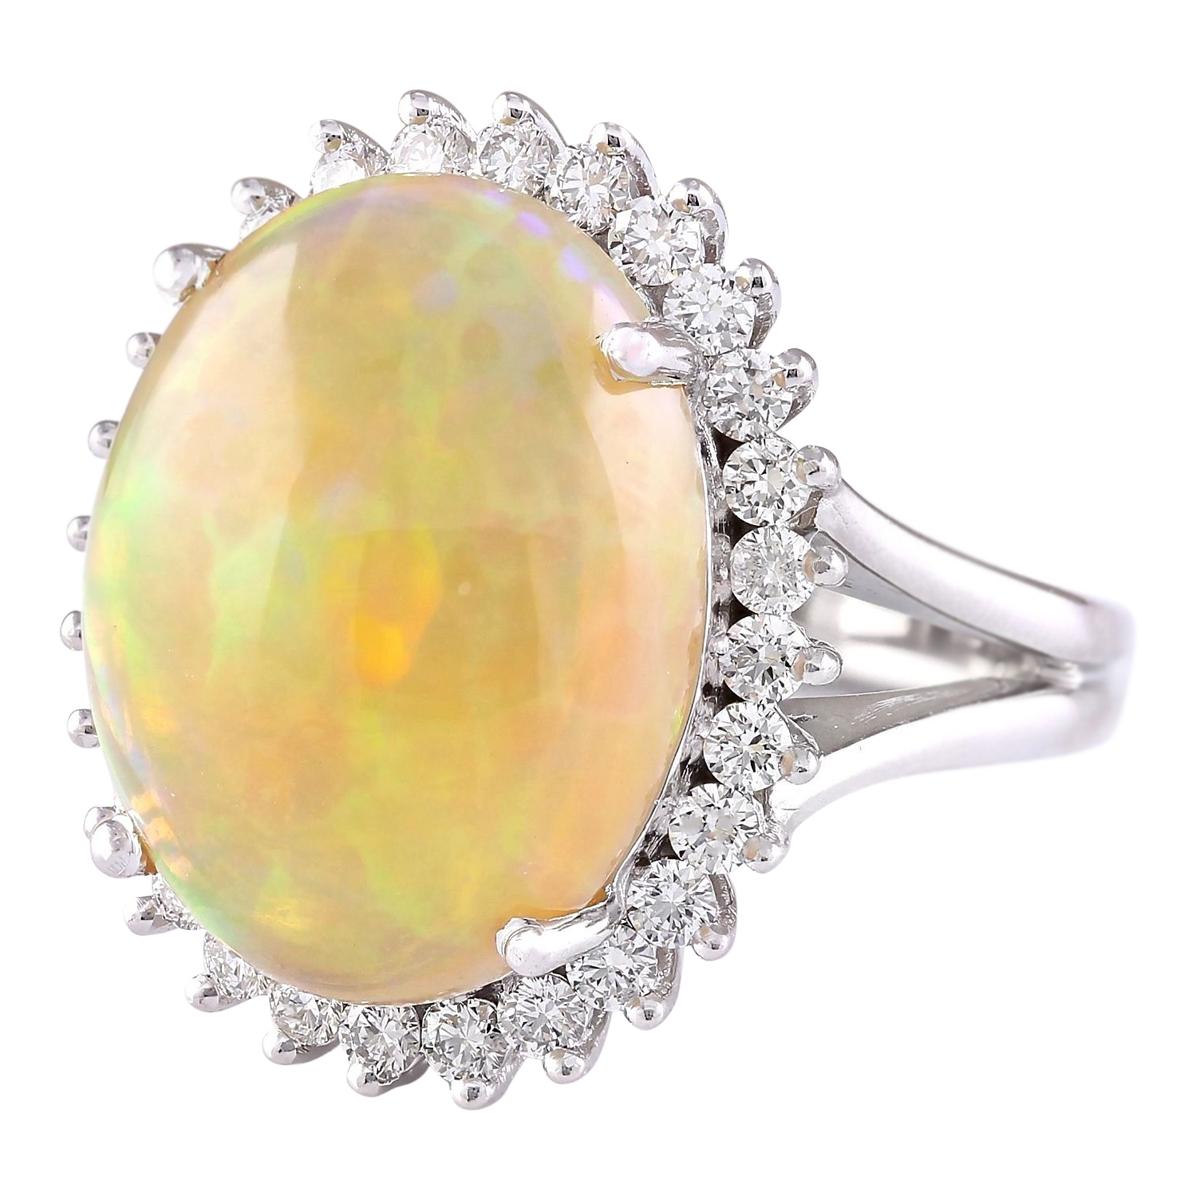 Introducing our enchanting 13.48 Carat Opal 14 Karat White Gold Diamond Ring. Crafted from stamped 14K White Gold, this ring weighs 14.8 grams, ensuring both quality and durability. The focal point is a breathtaking opal gemstone weighing 12.48